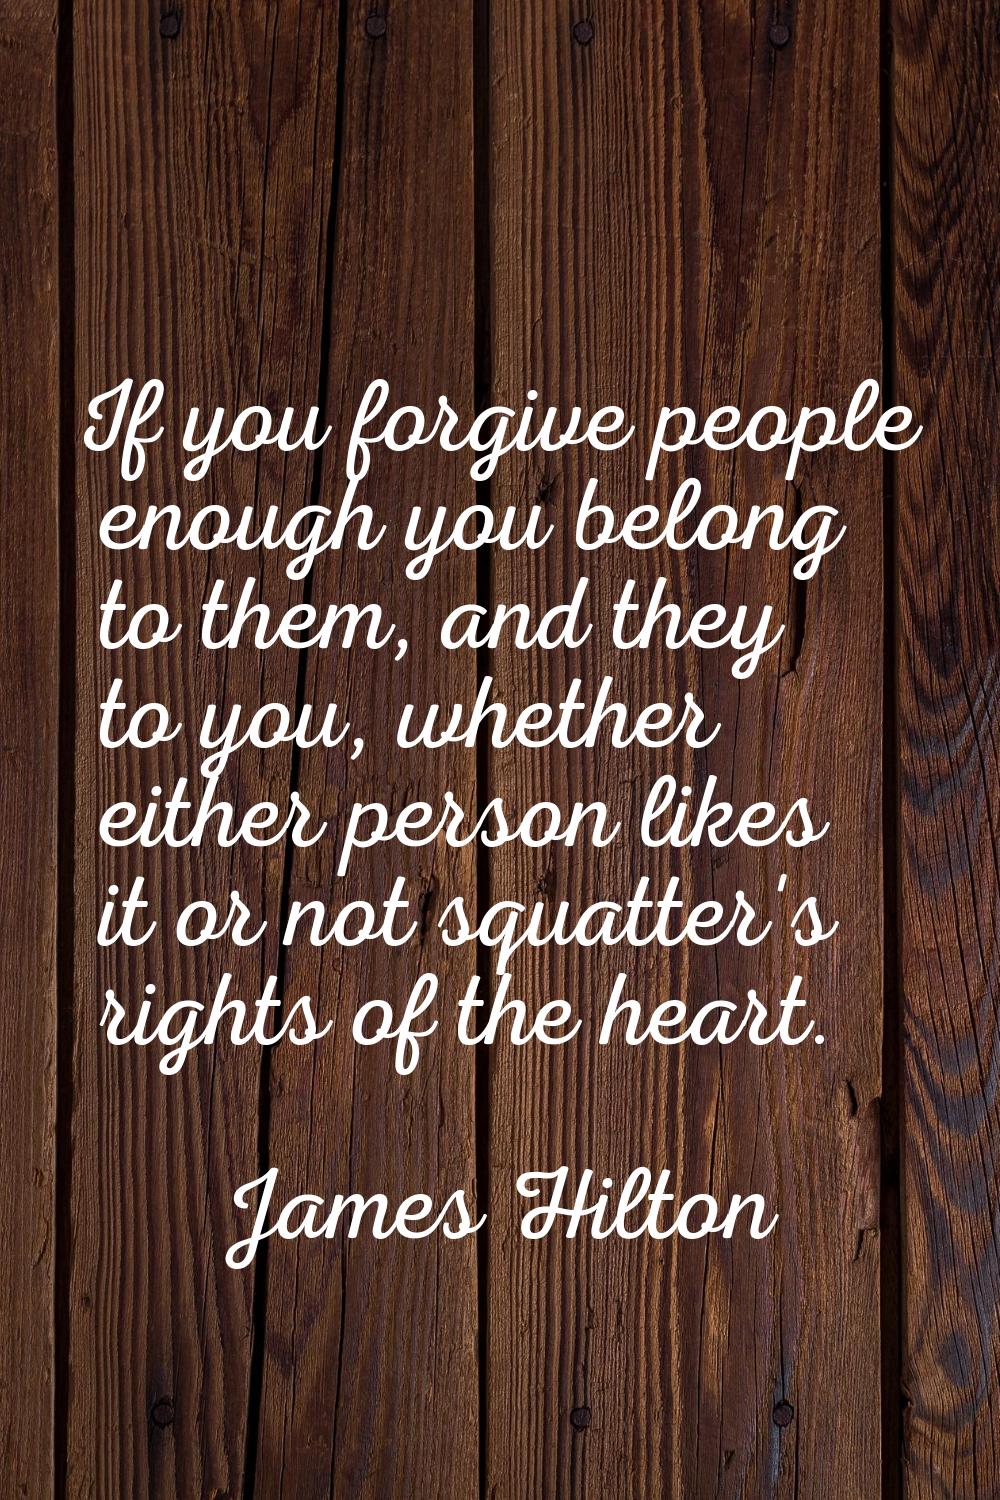 If you forgive people enough you belong to them, and they to you, whether either person likes it or